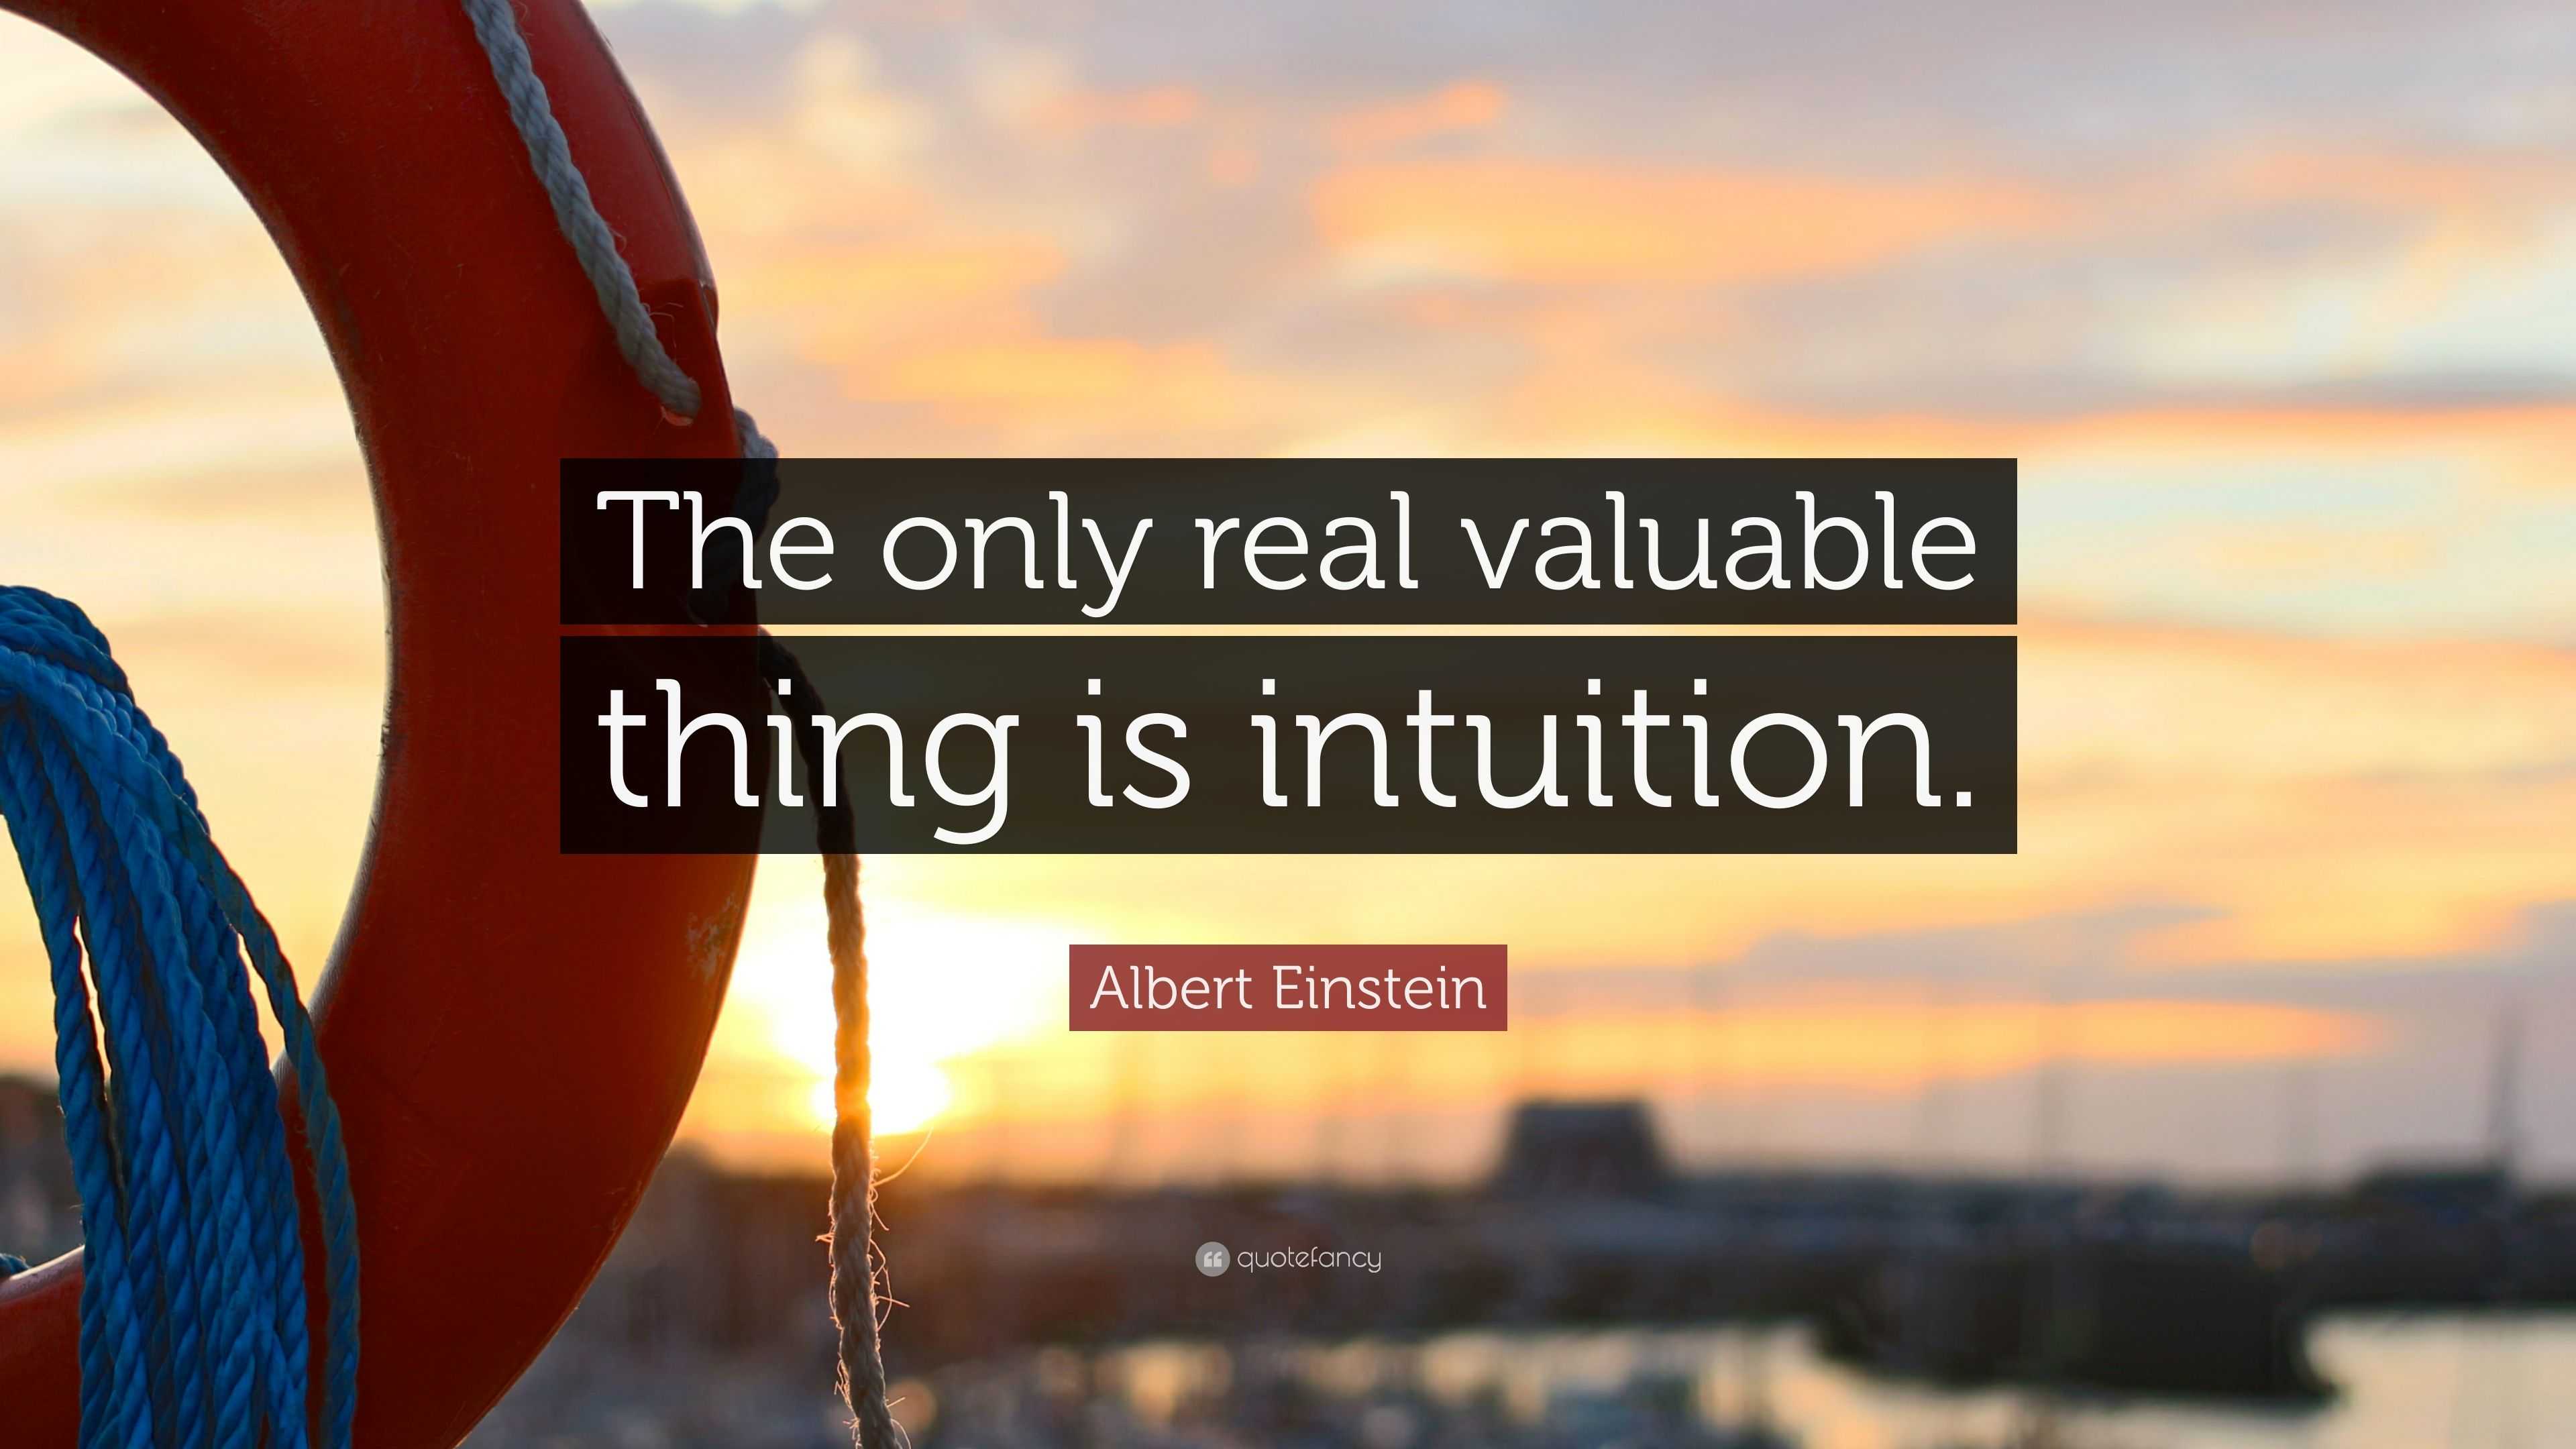 Albert Einstein Quote “The only real valuable thing is intuition.”